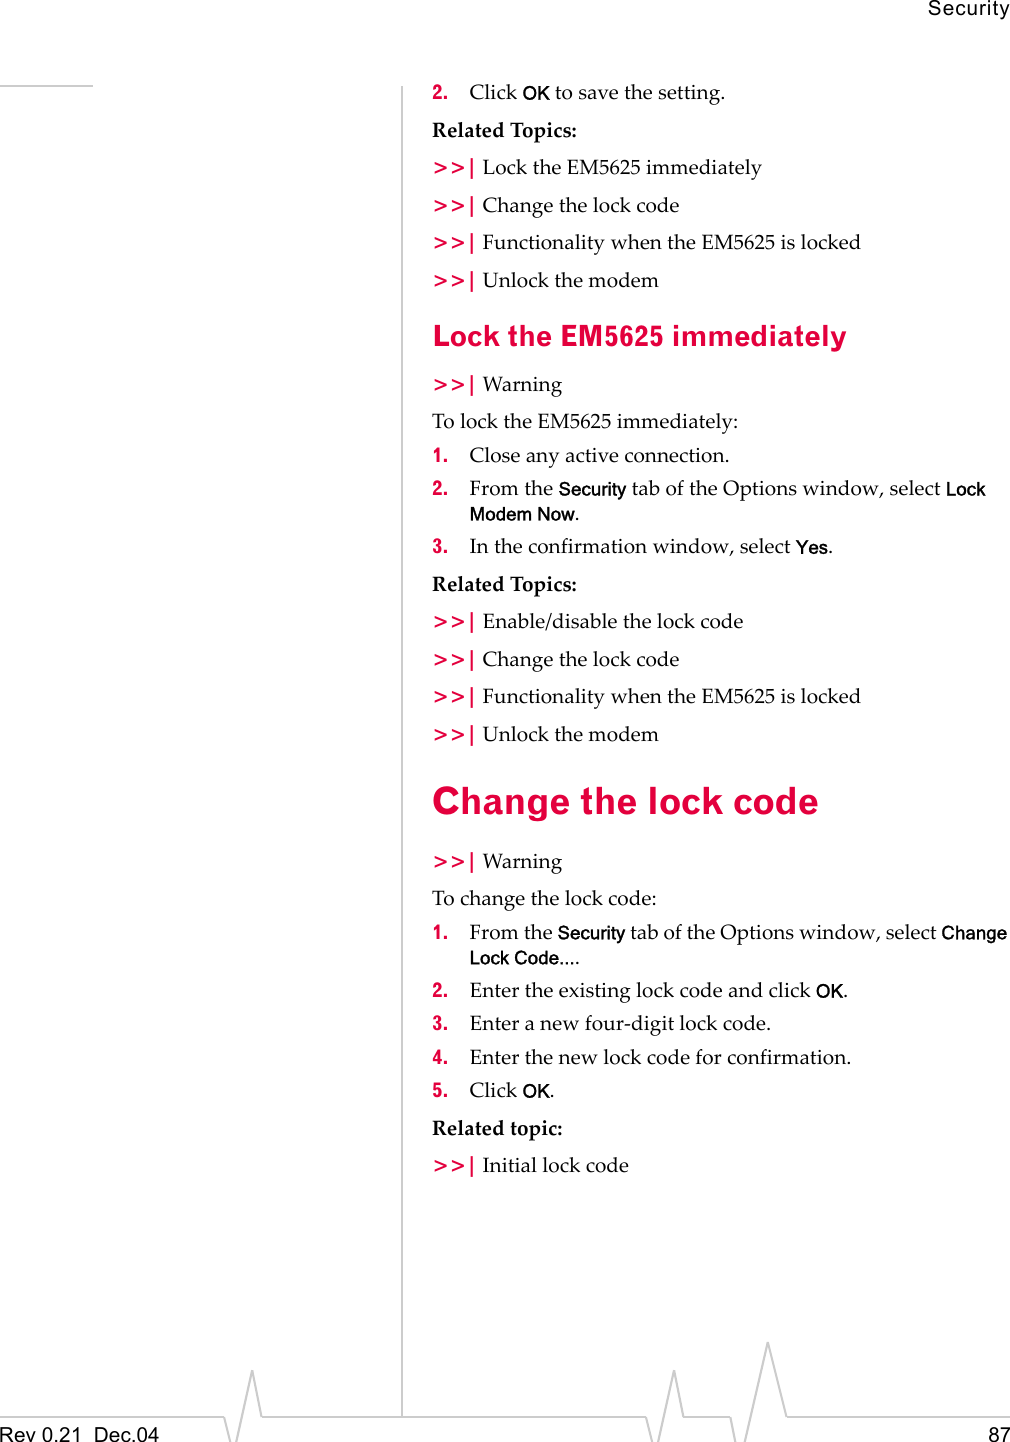 SecurityRev 0.21  Dec.04 872. Click OK to save the setting.Related Topics:&gt;&gt;| Lock the EM5625 immediately&gt;&gt;| Change the lock code&gt;&gt;| Functionality when the EM5625 is locked&gt;&gt;| Unlock the modemLock the EM5625 immediately&gt;&gt;| WarningTo lock the EM5625 immediately:1. Close any active connection.2. From the Security tab of the Options window, select Lock Modem Now.3. In the confirmation window, select Yes.Related Topics:&gt;&gt;| Enable/disable the lock code&gt;&gt;| Change the lock code&gt;&gt;| Functionality when the EM5625 is locked&gt;&gt;| Unlock the modemChange the lock code&gt;&gt;| WarningTo change the lock code:1. From the Security tab of the Options window, select Change Lock Code....2. Enter the existing lock code and click OK.3. Enter a new four-digit lock code.4. Enter the new lock code for confirmation.5. Click OK.Related topic:&gt;&gt;| Initial lock code